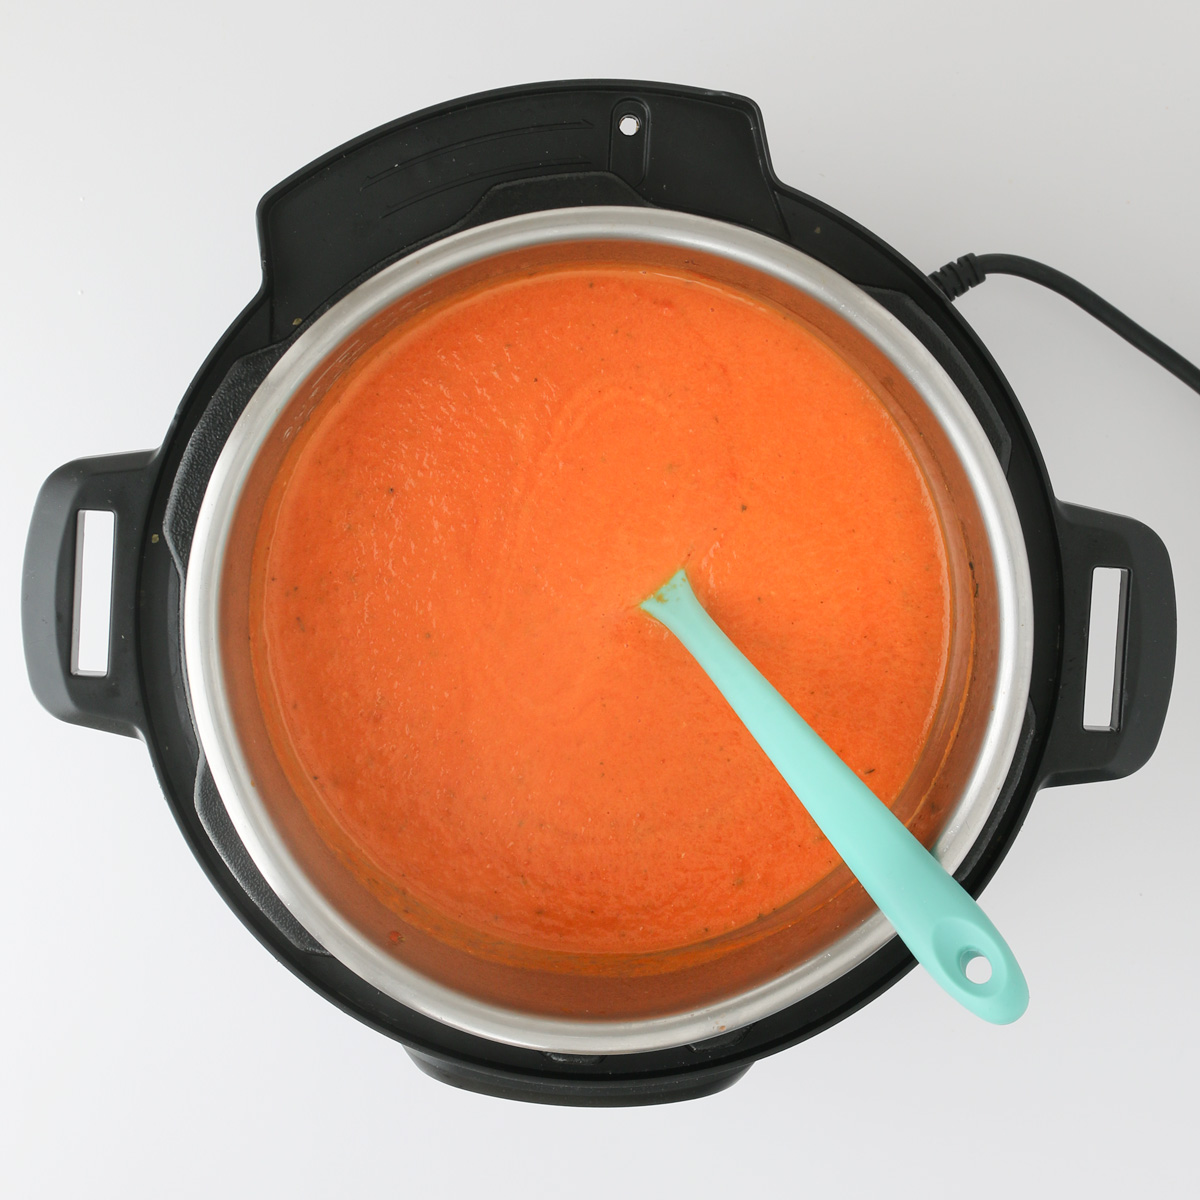 tomato soup in instant pot with teal spatula.